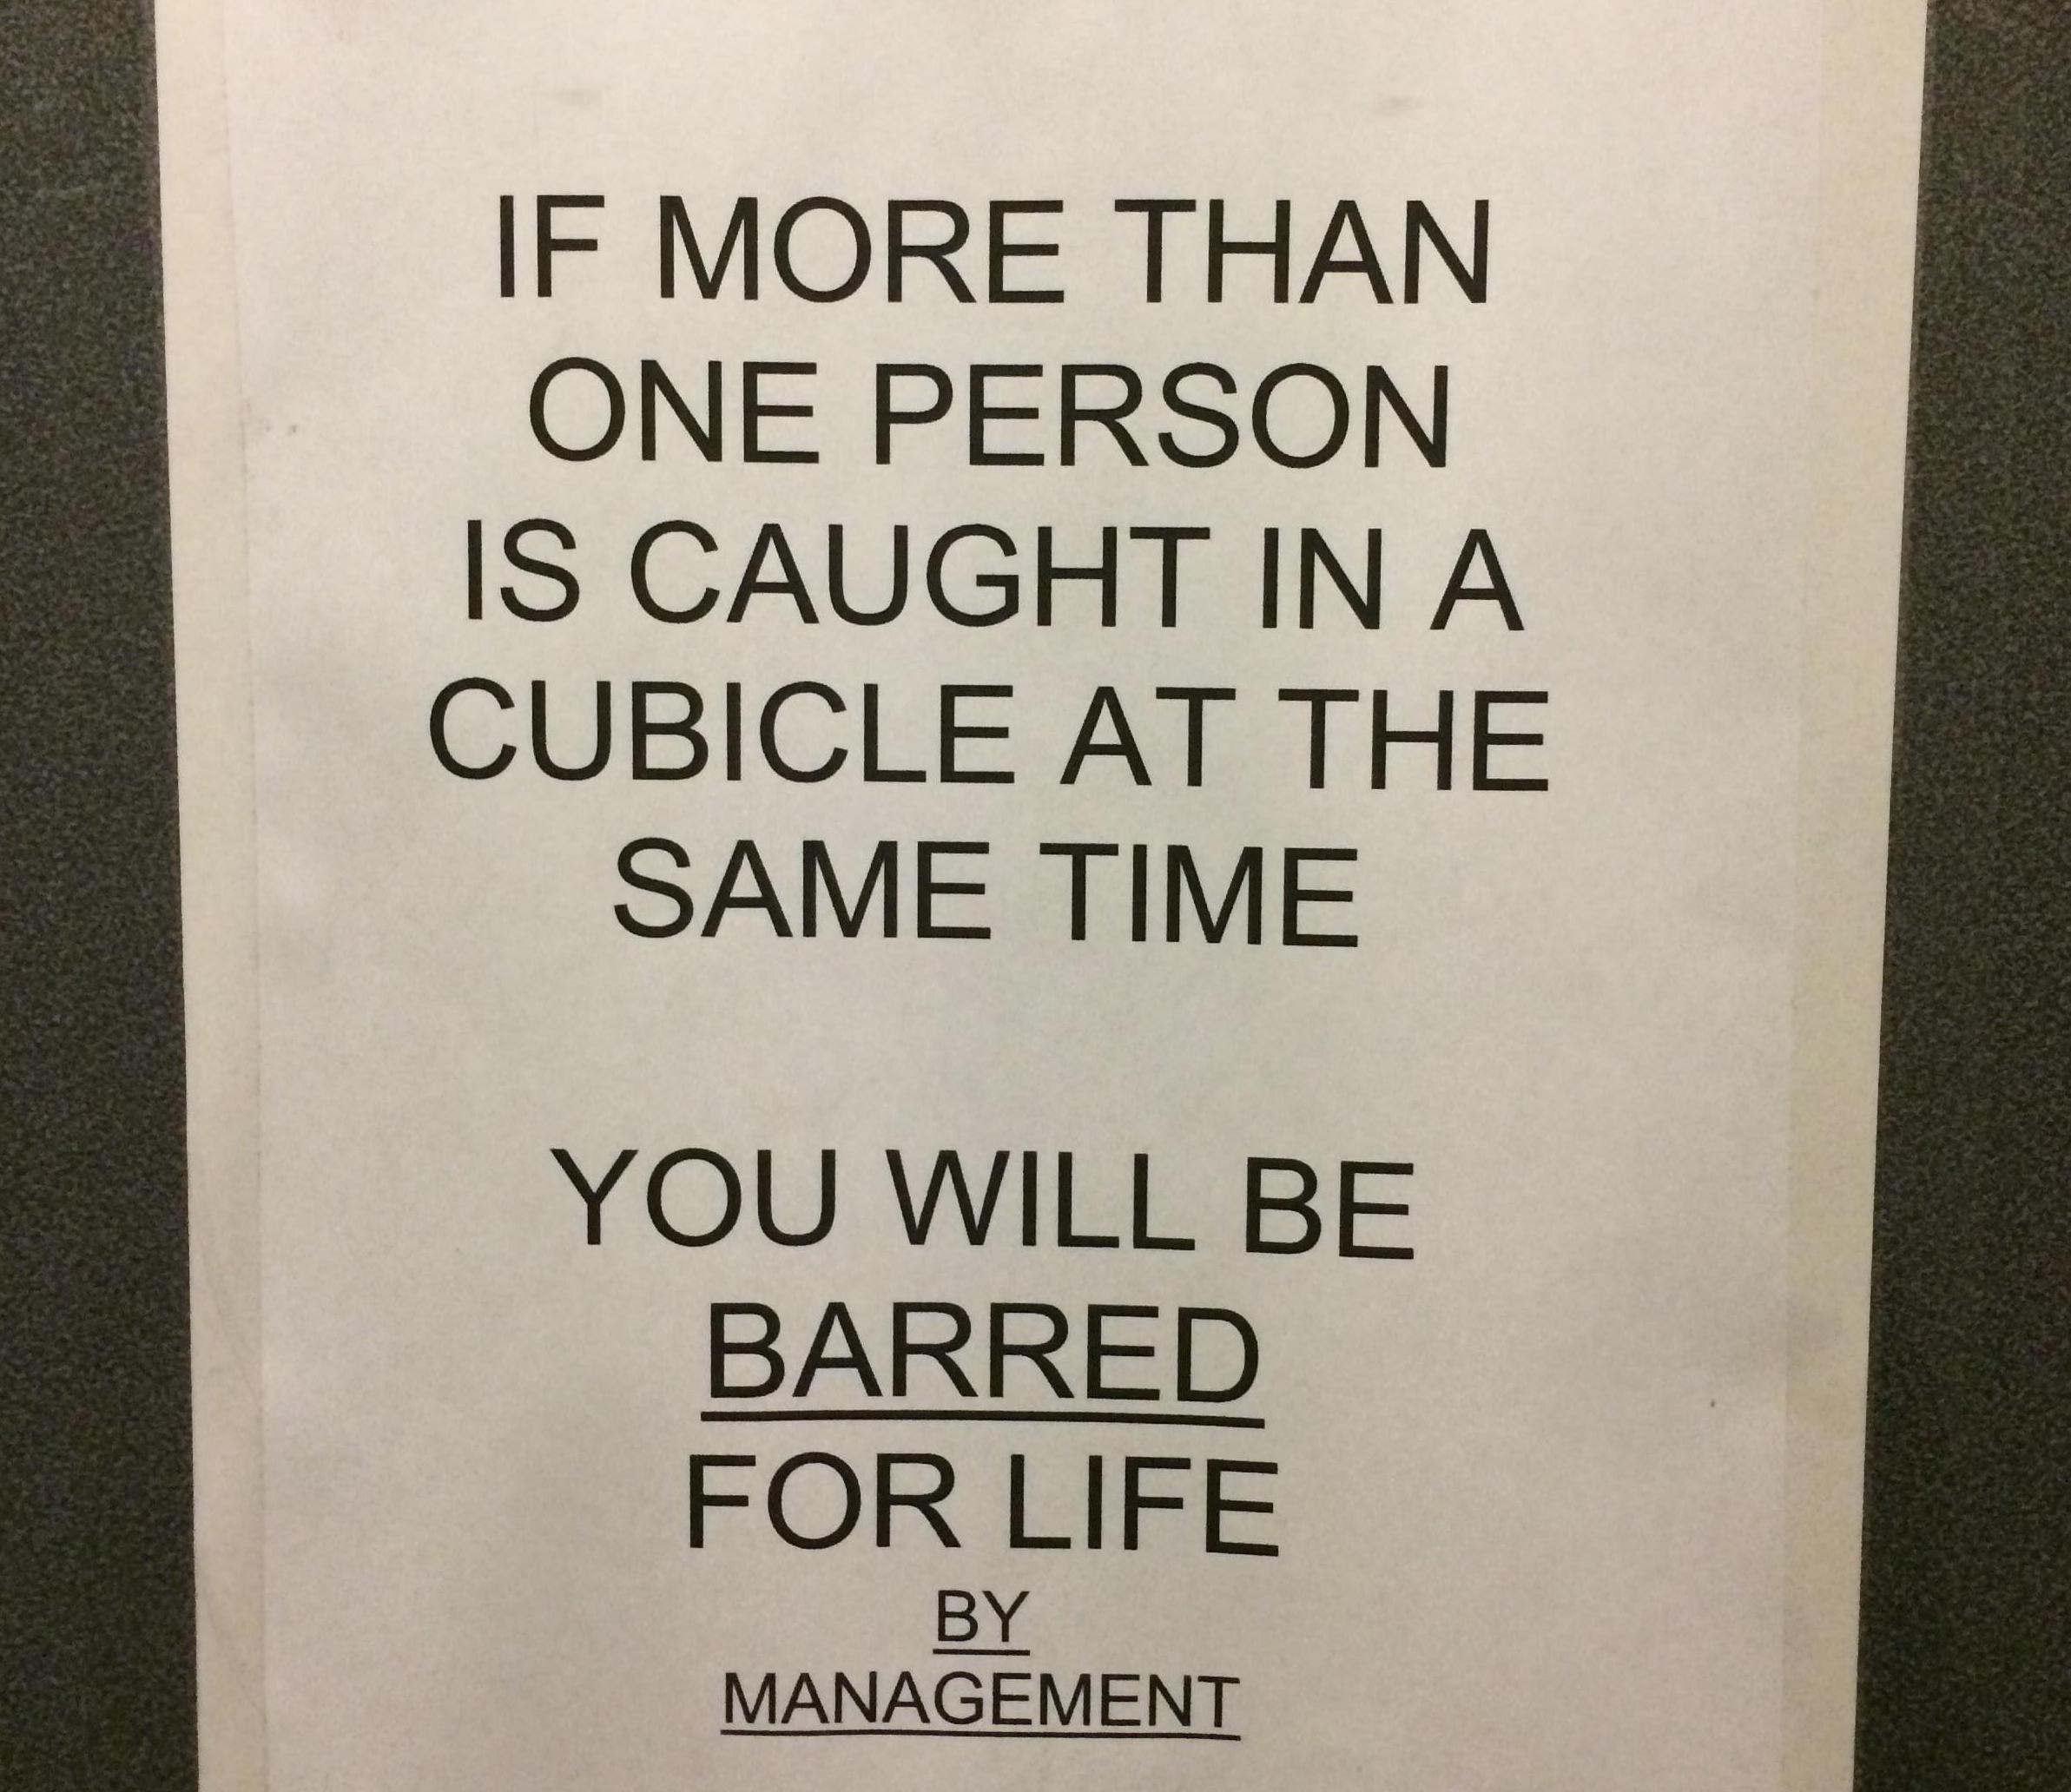 Horrible Management - if you really knew me - If More Than One Person Is Caught In A Cubicle At The Same Time You Will Be Barred For Life By Management